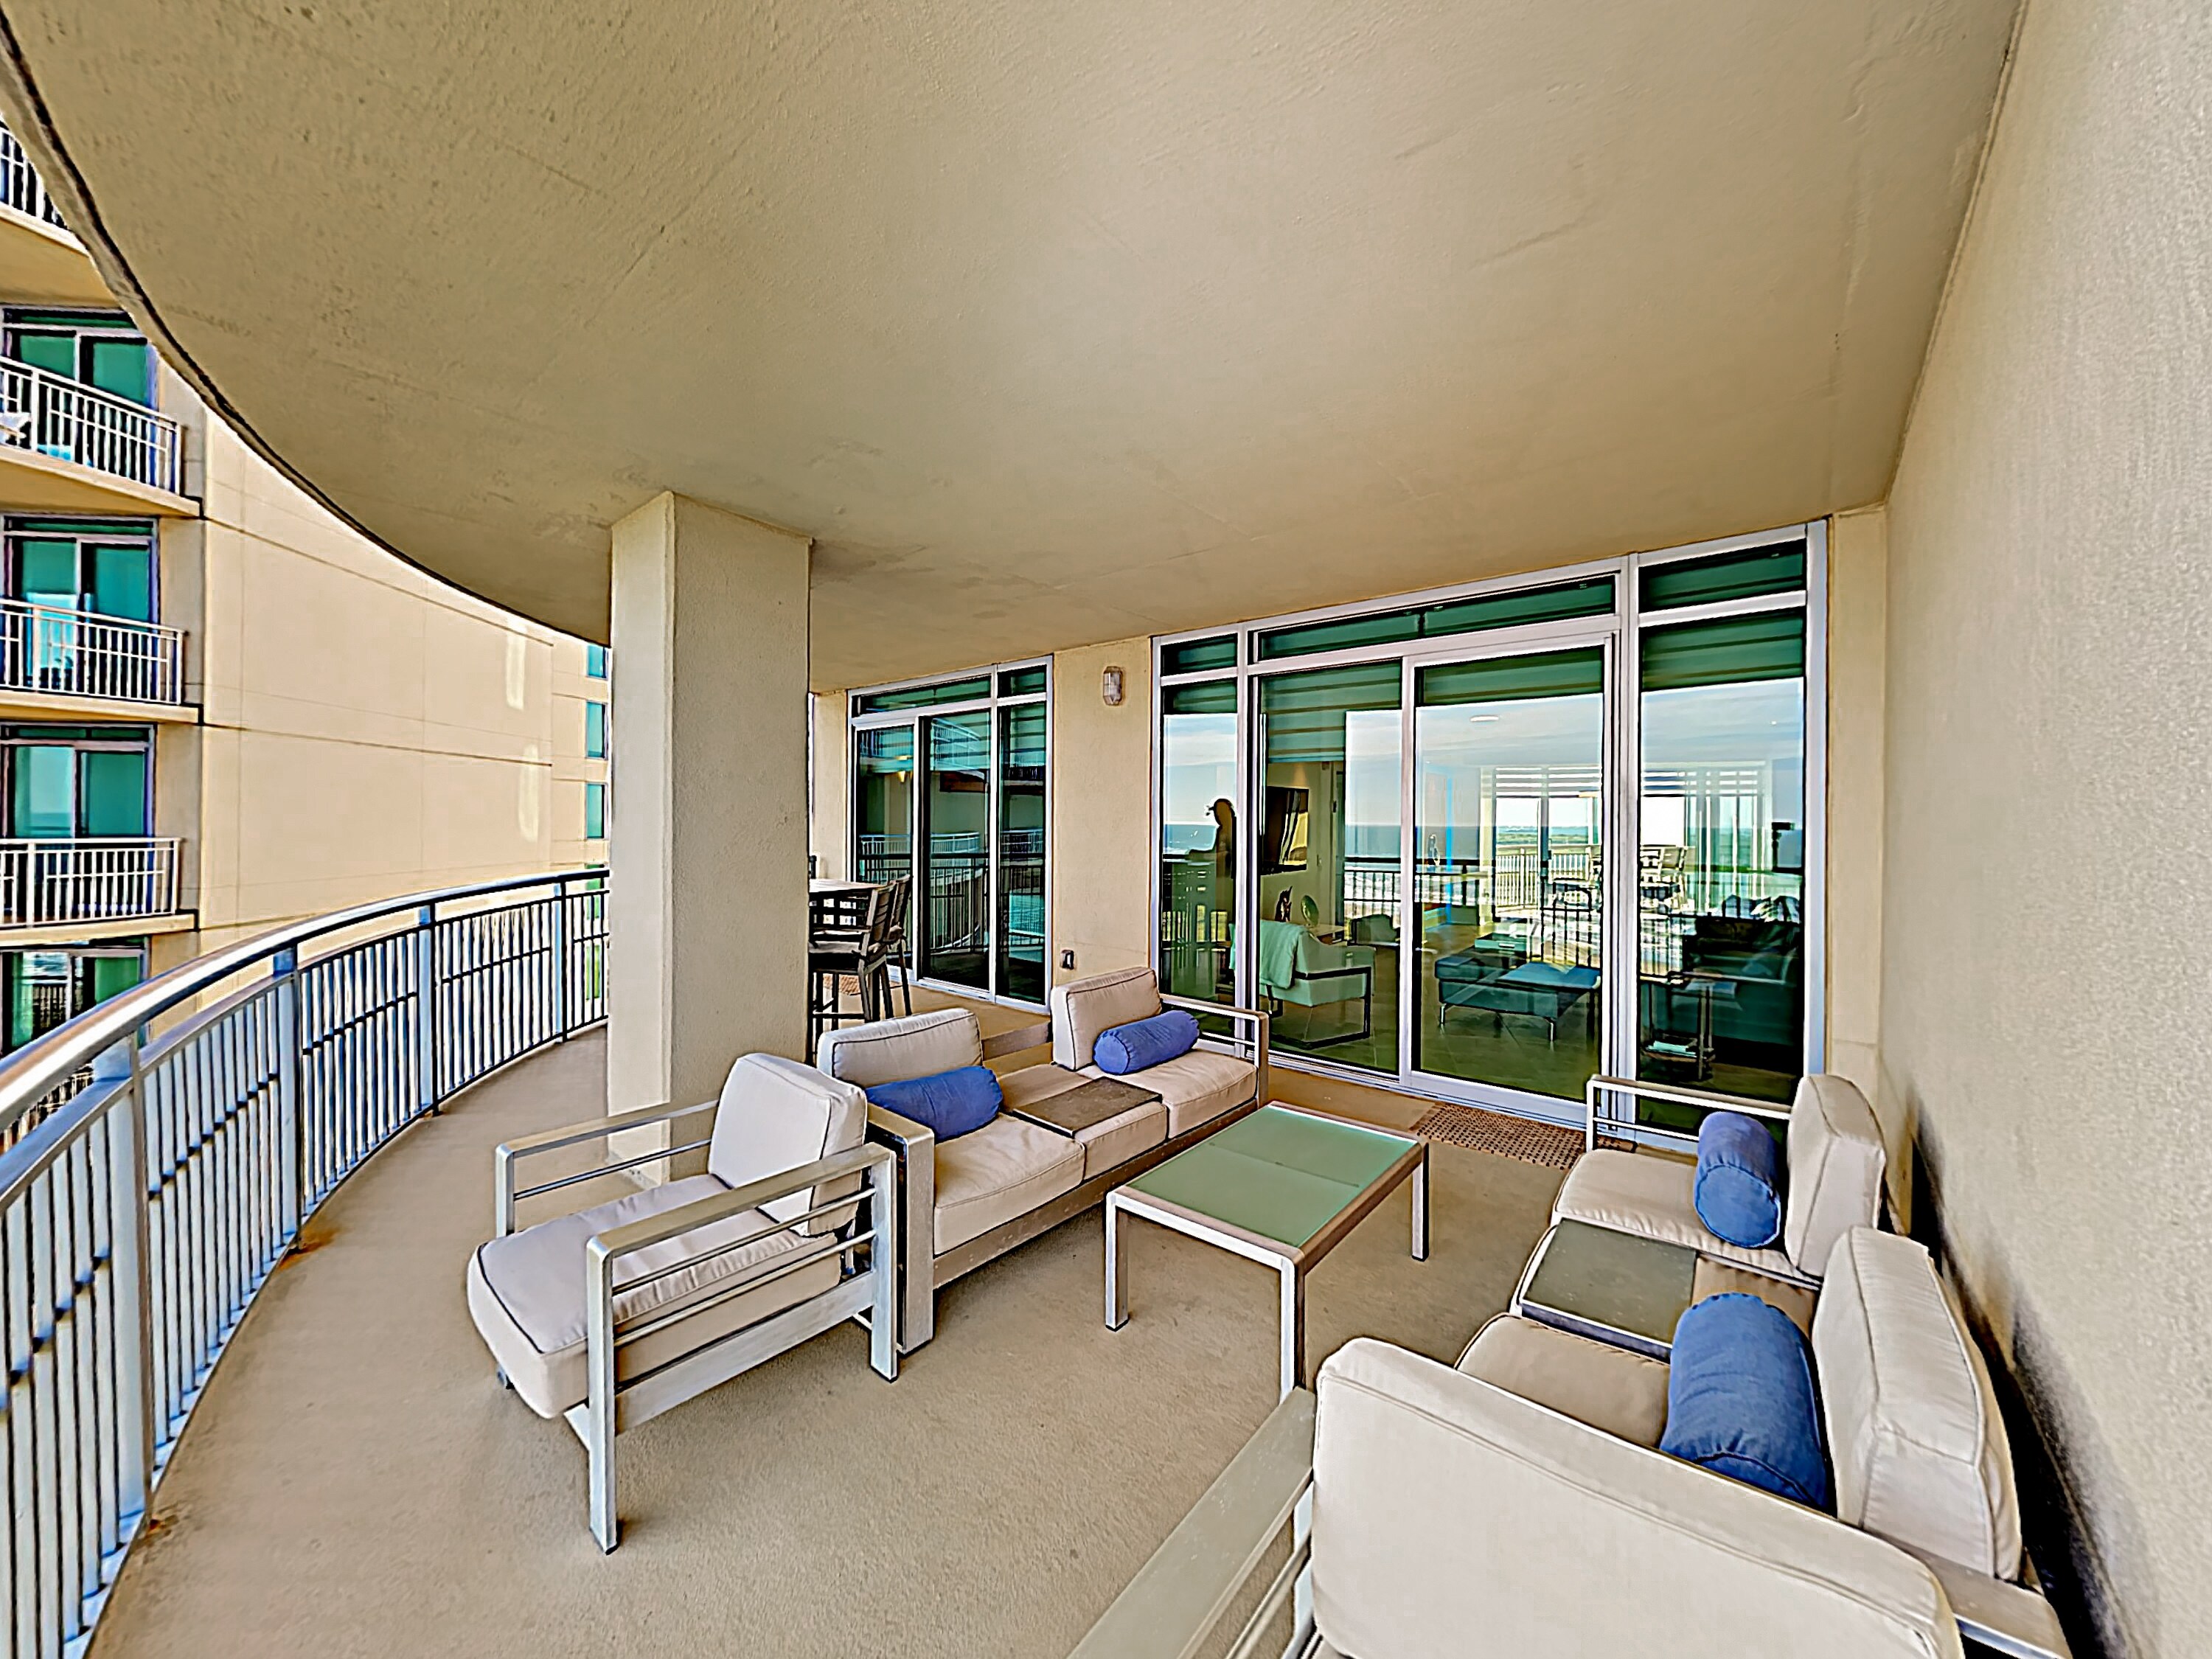 Welcome to Galveston! This condo is professionally managed by TurnKey Vacation Rentals.